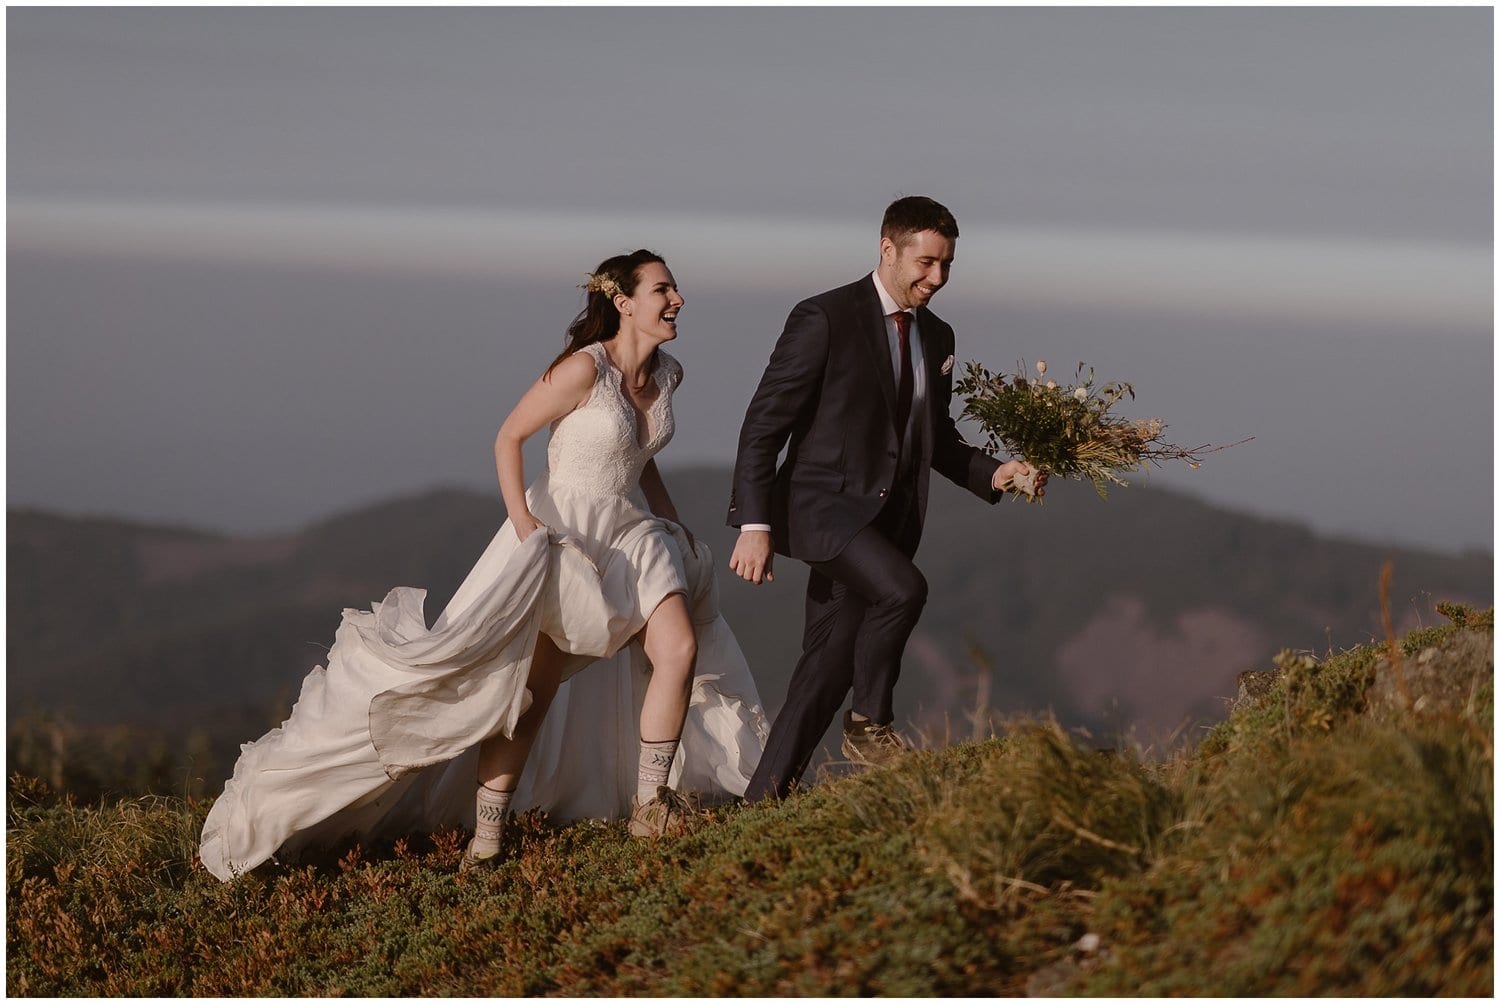 Bride and groom are hiking together during sunrise in Washington. 